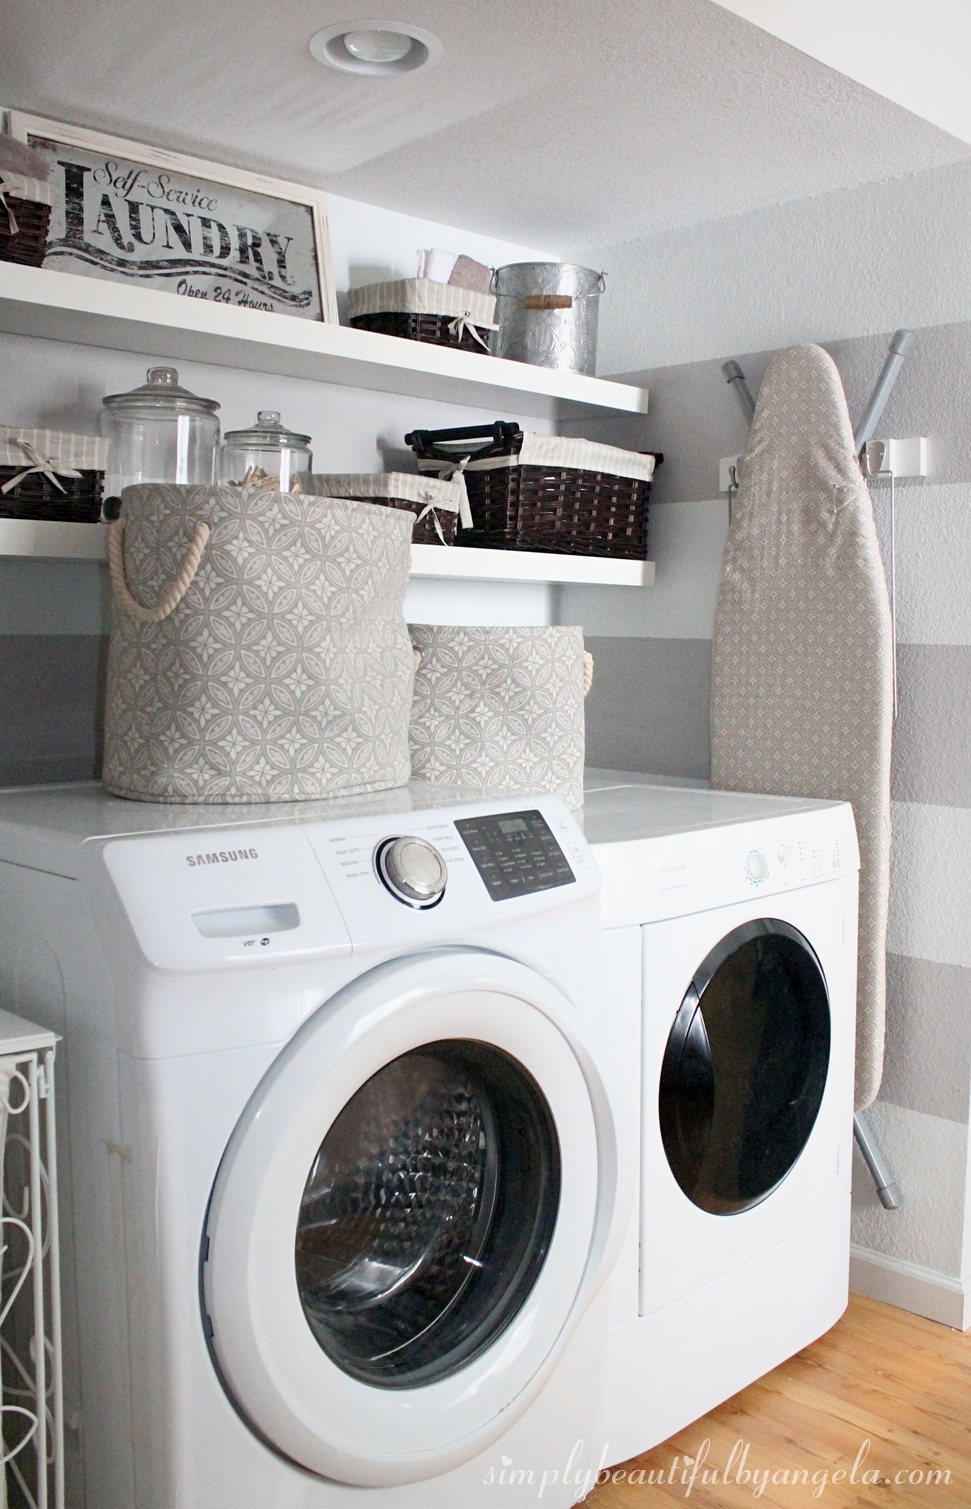 How to Paint Stripes: A Refreshed Laundry Space!